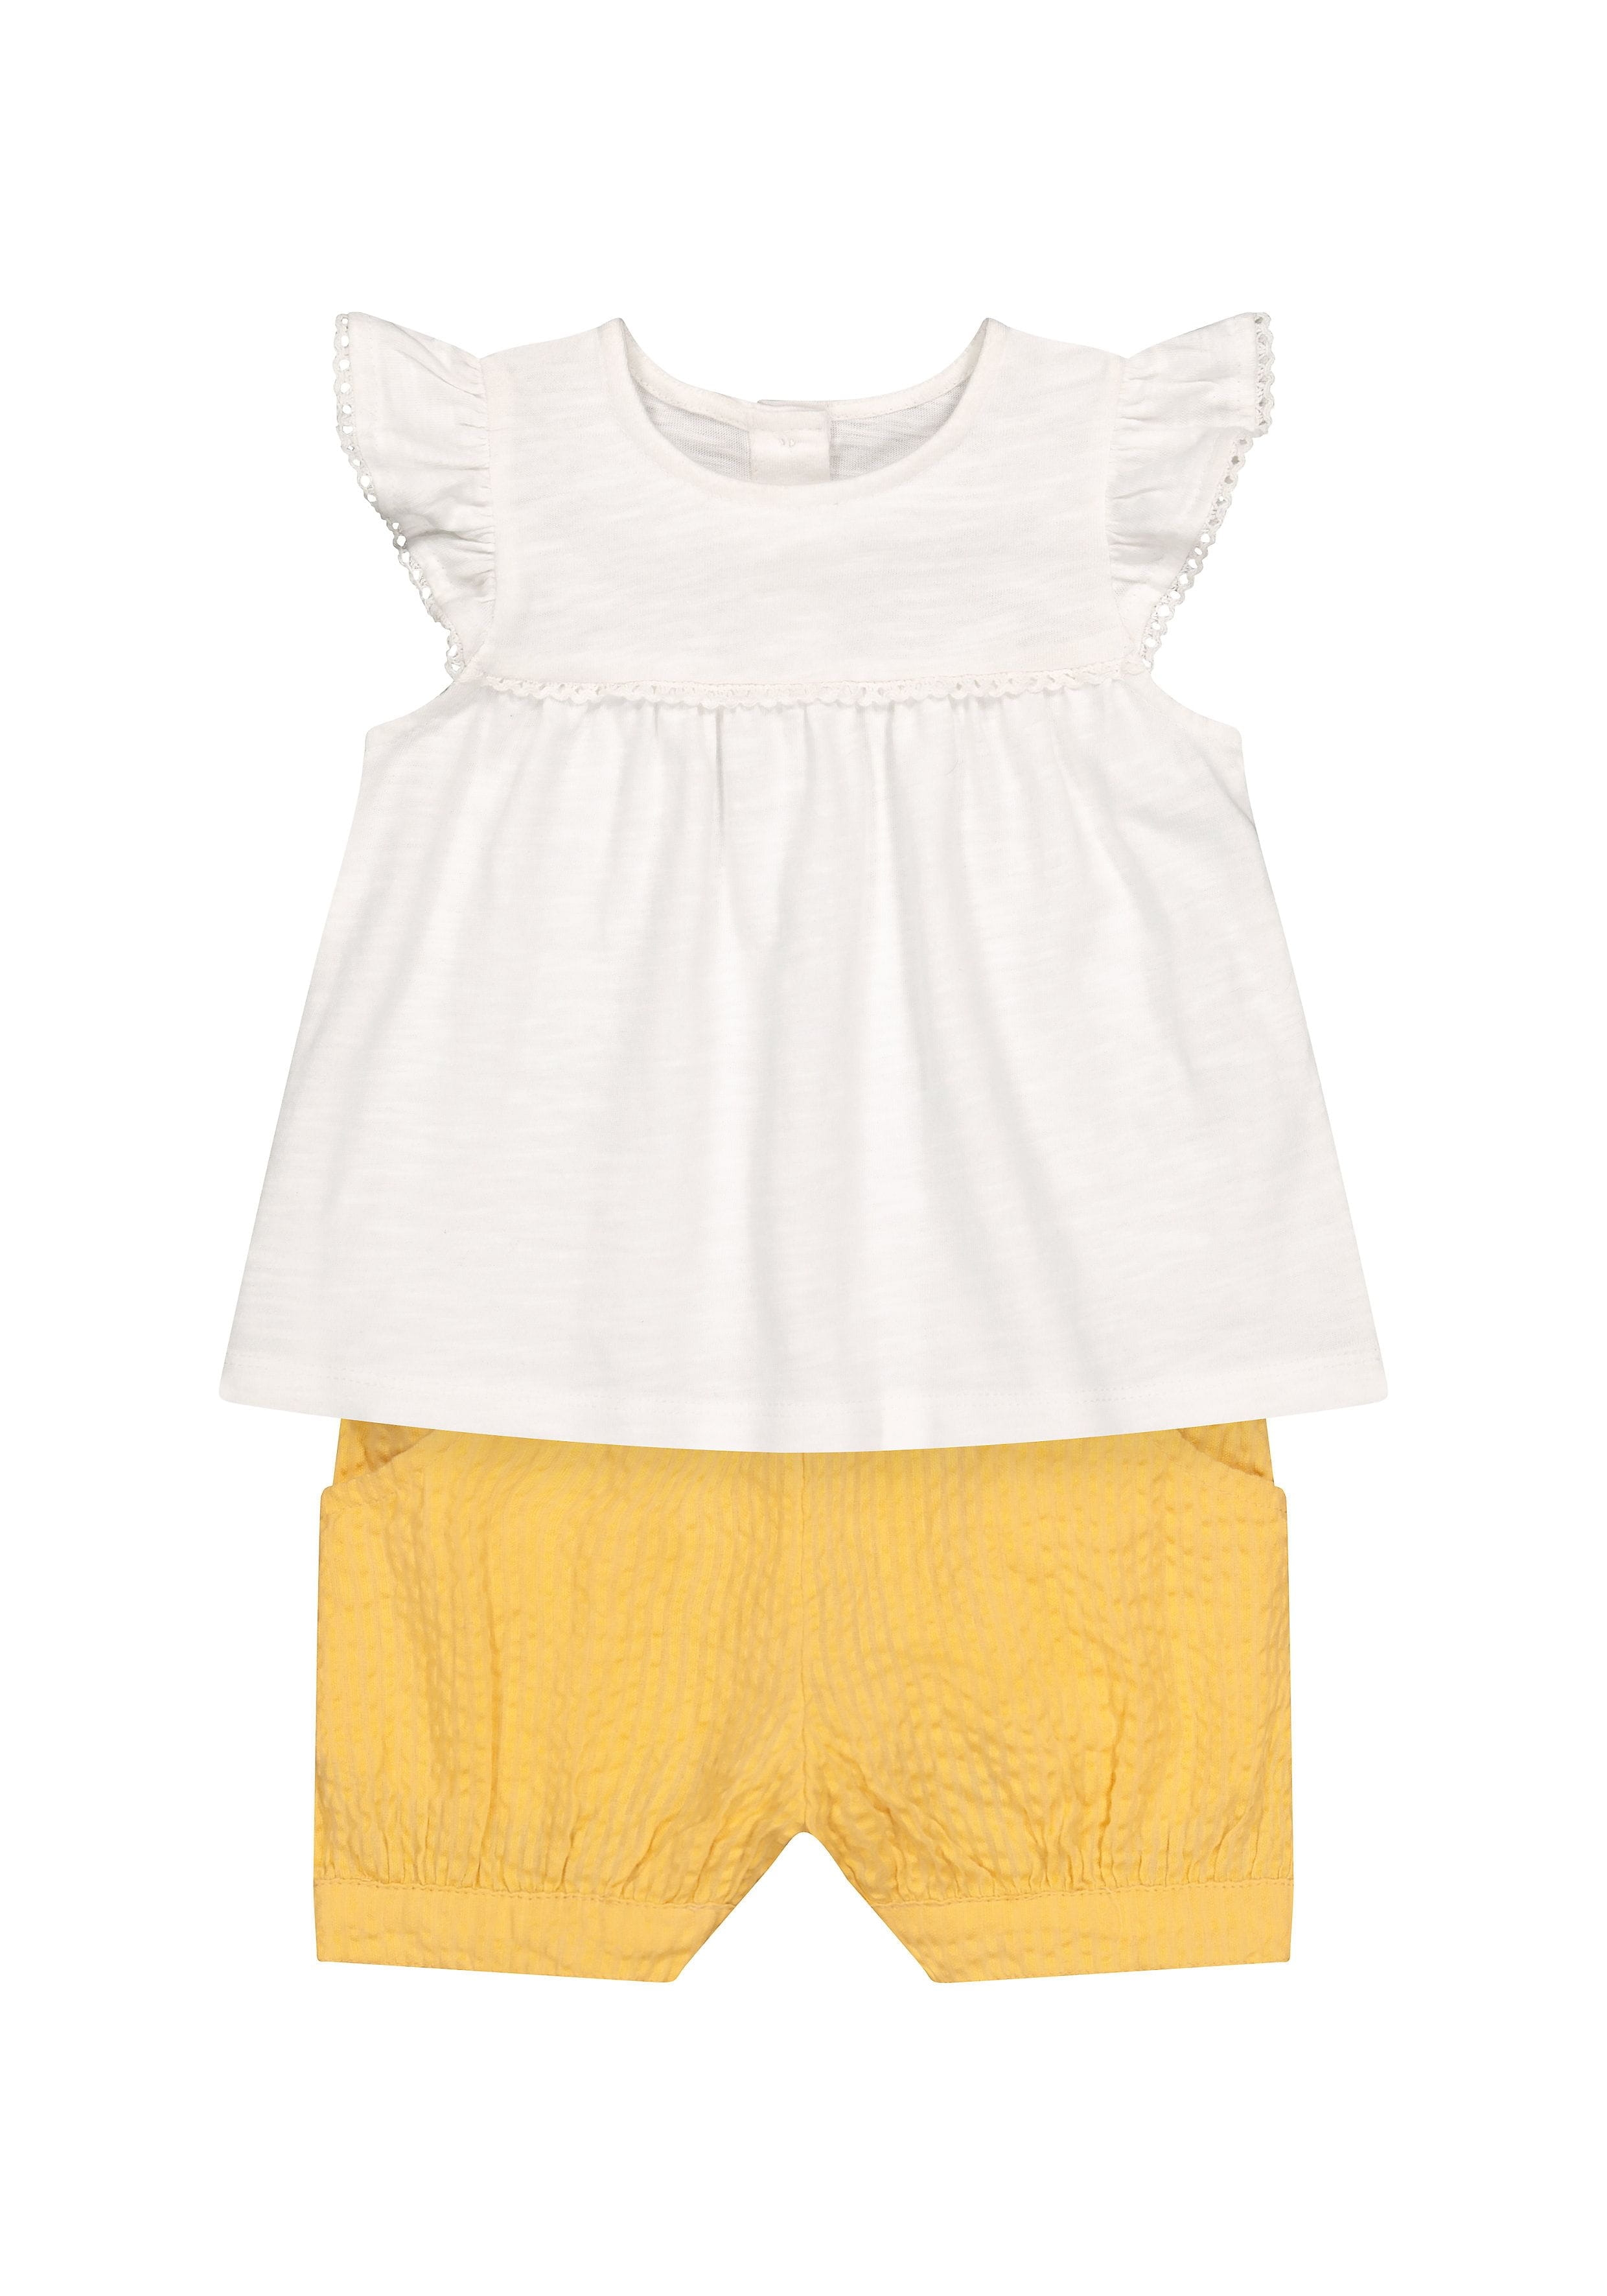 Mothercare | Girls Half Sleeves Lace Details Top And Shorts Set - White Yellow 0